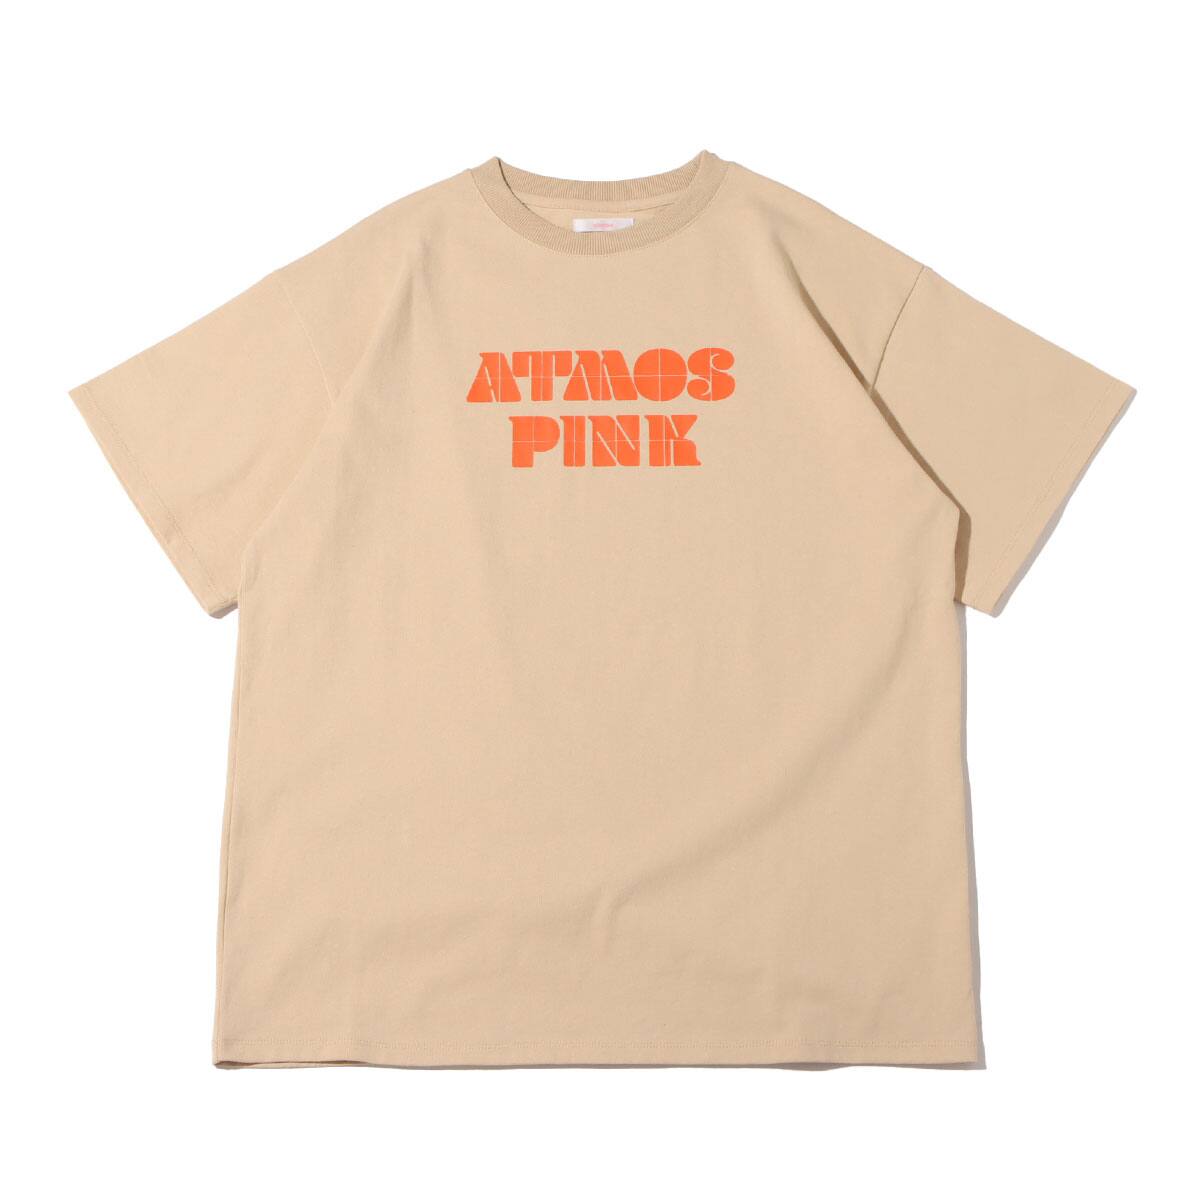 atmos pink パネルロゴ ビッグT BEIGE 22SP-I_photo_large